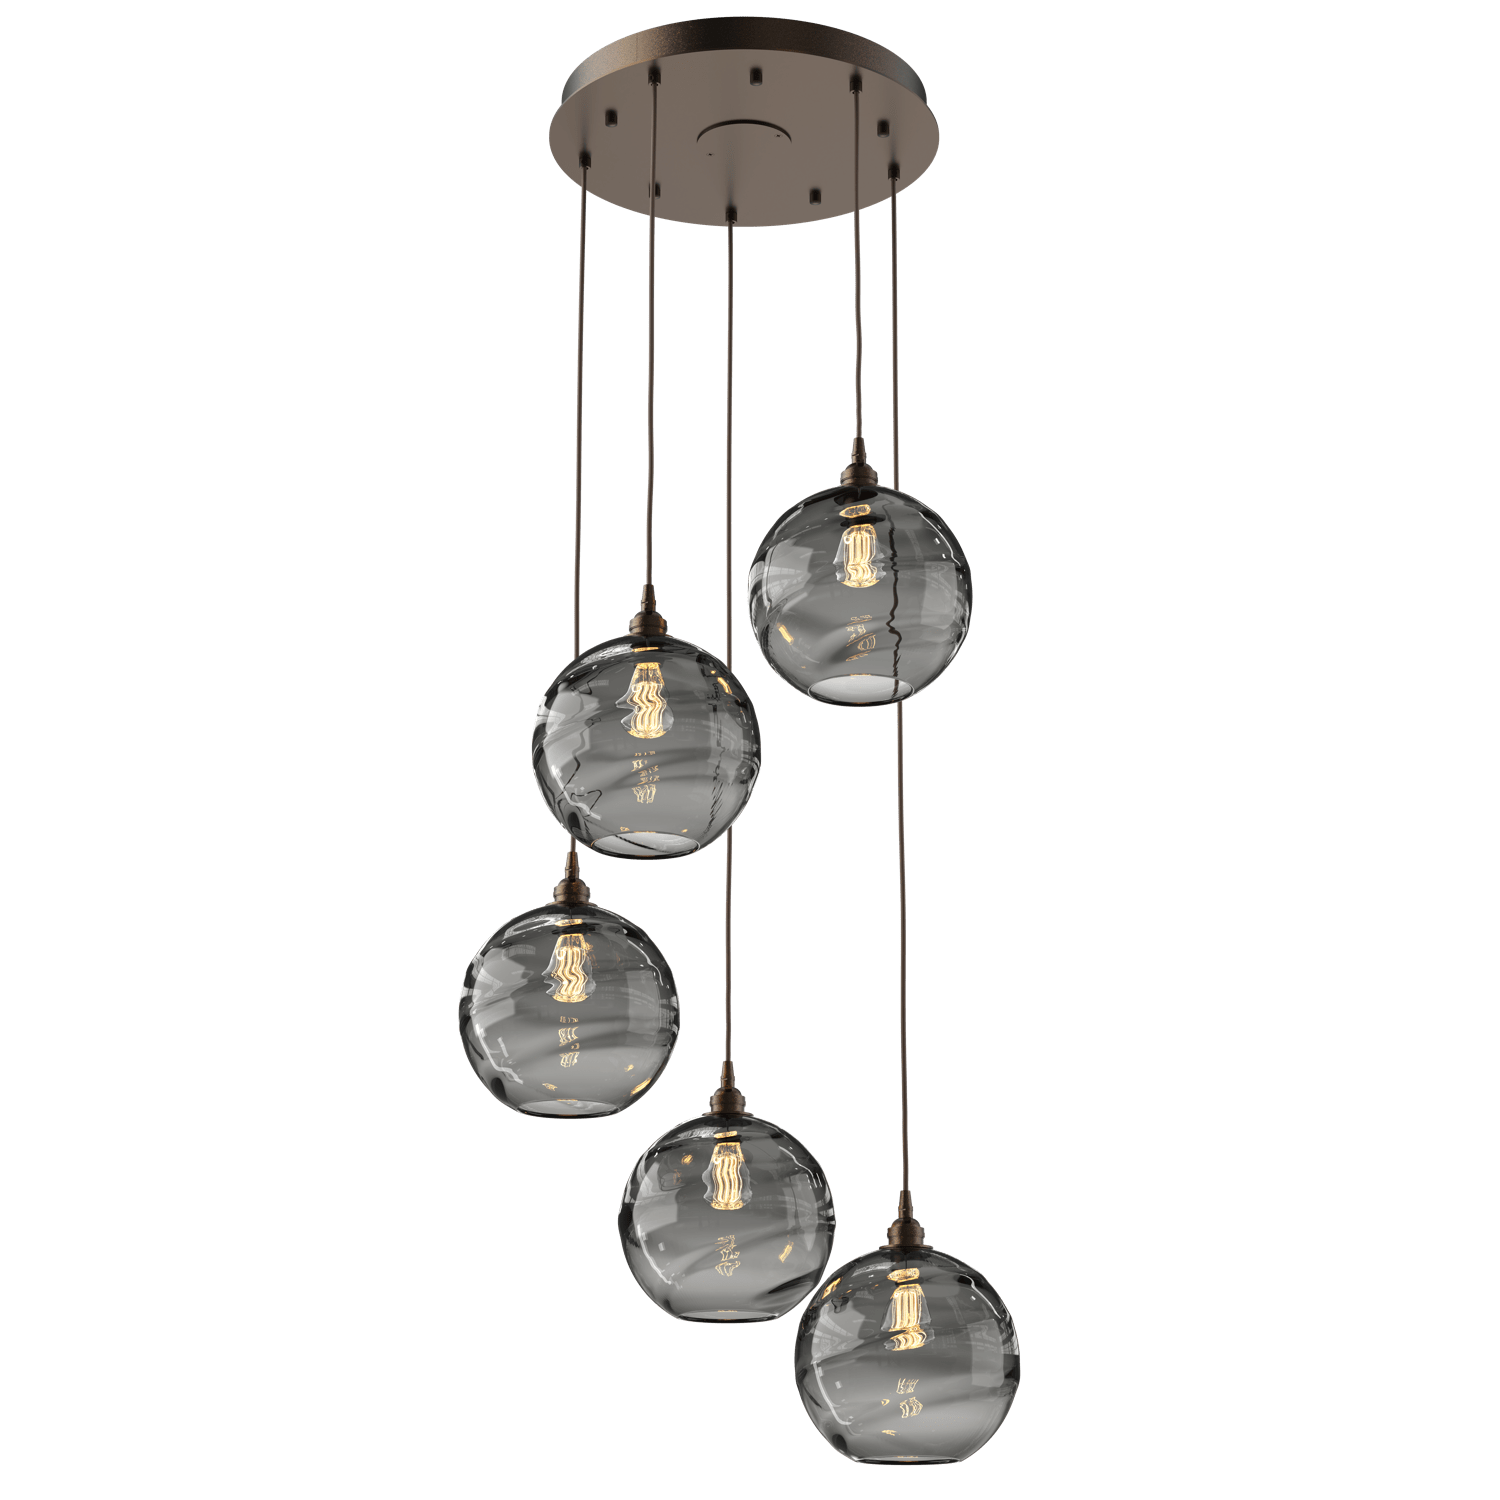 CHB0047-05-FB-OS-Hammerton-Studio-Optic-Blown-Glass-Terra-5-light-round-pendant-chandelier-with-flat-bronze-finish-and-optic-smoke-blown-glass-shades-and-incandescent-lamping